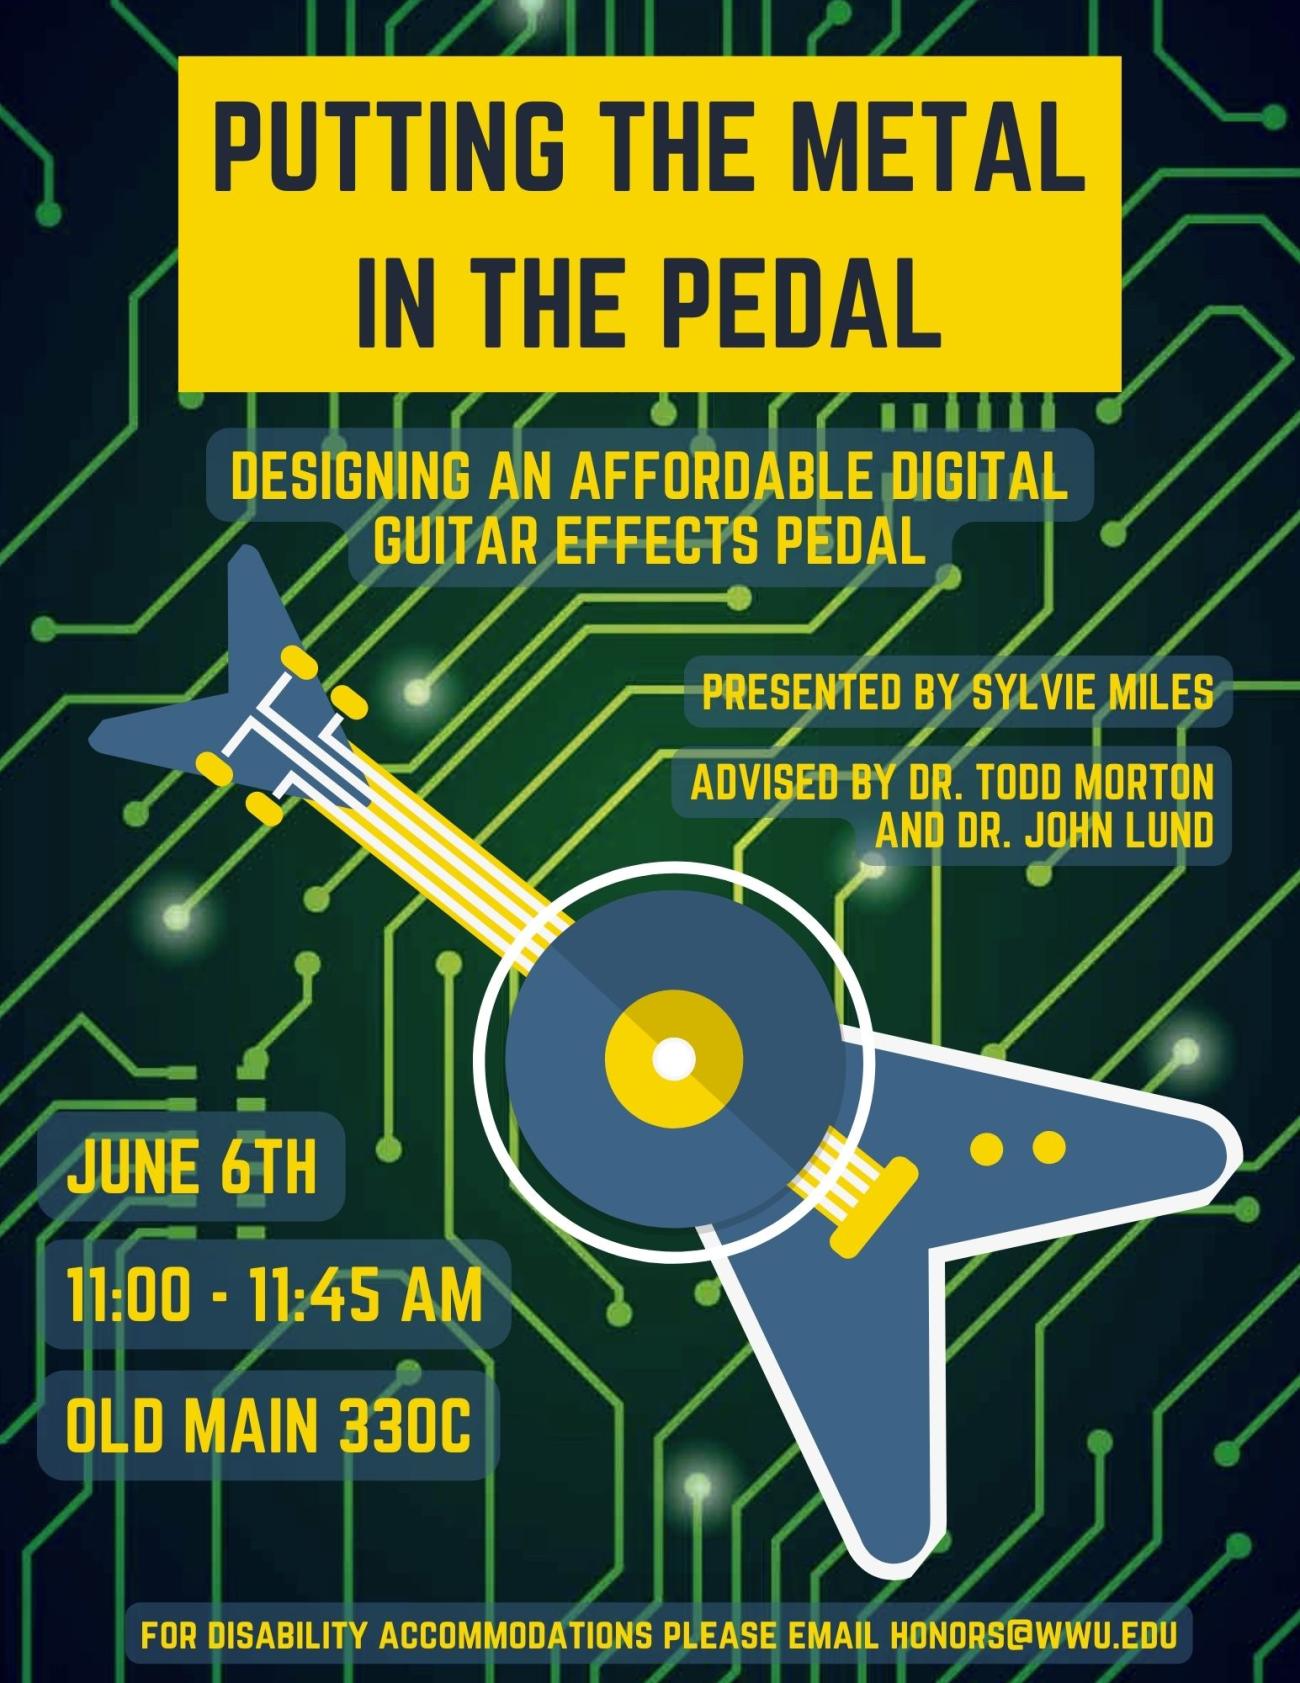 Image consists of circuit board background with graphic of bass guitar overlayed. Text says: “Putting the Metal in the Pedal: Designing an Affordable Digital Guitar Effects Pedal. Presented by Sylvie Miles. Advised by Dr. Todd Morton and Dr. John Lund. June 6th, 11:00 – 11:45 AM, Old Main 330C. For disability accommodations please email honors@wwu.edu."